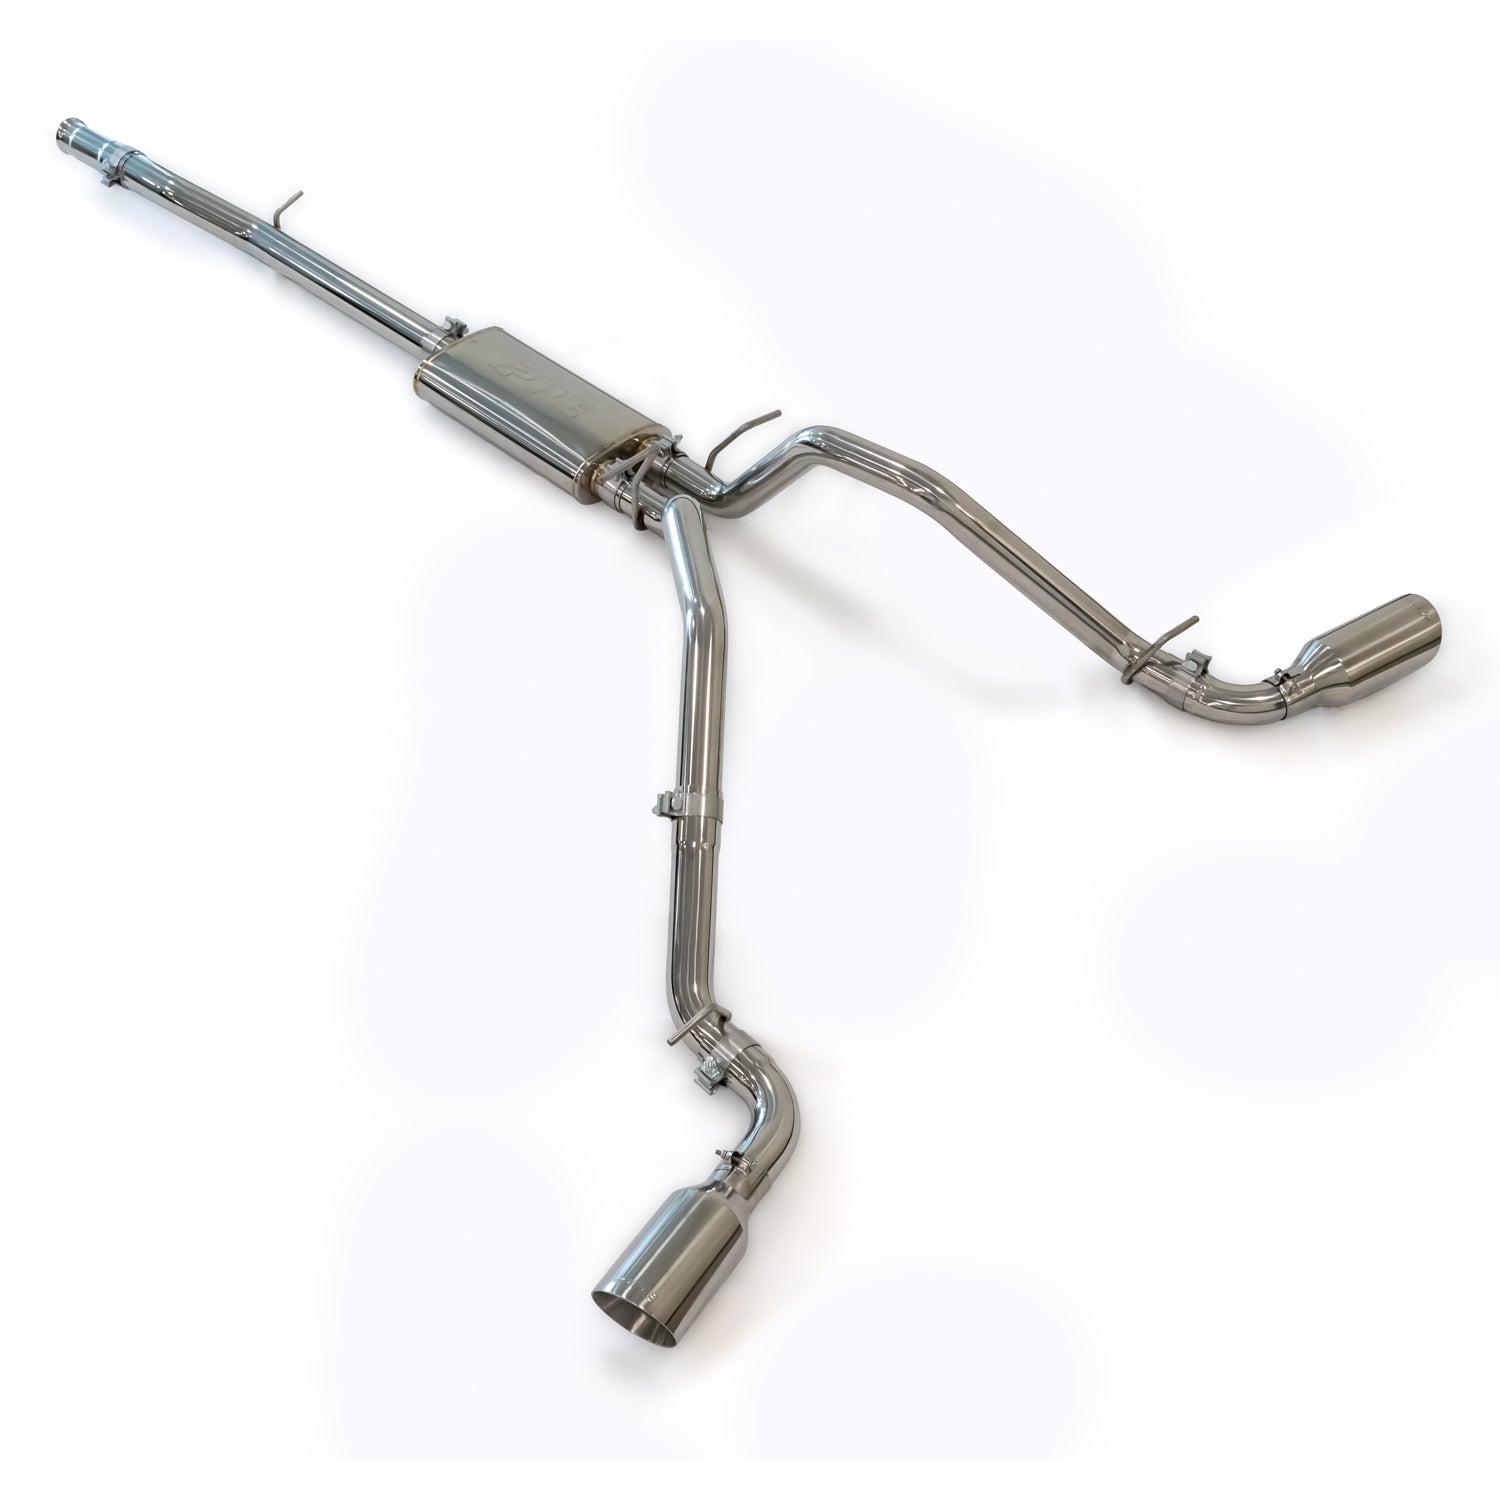 2009-2013 GM 1500 Cat-Back Exhaust Systems -  PPE, Pacific Performance Engineering